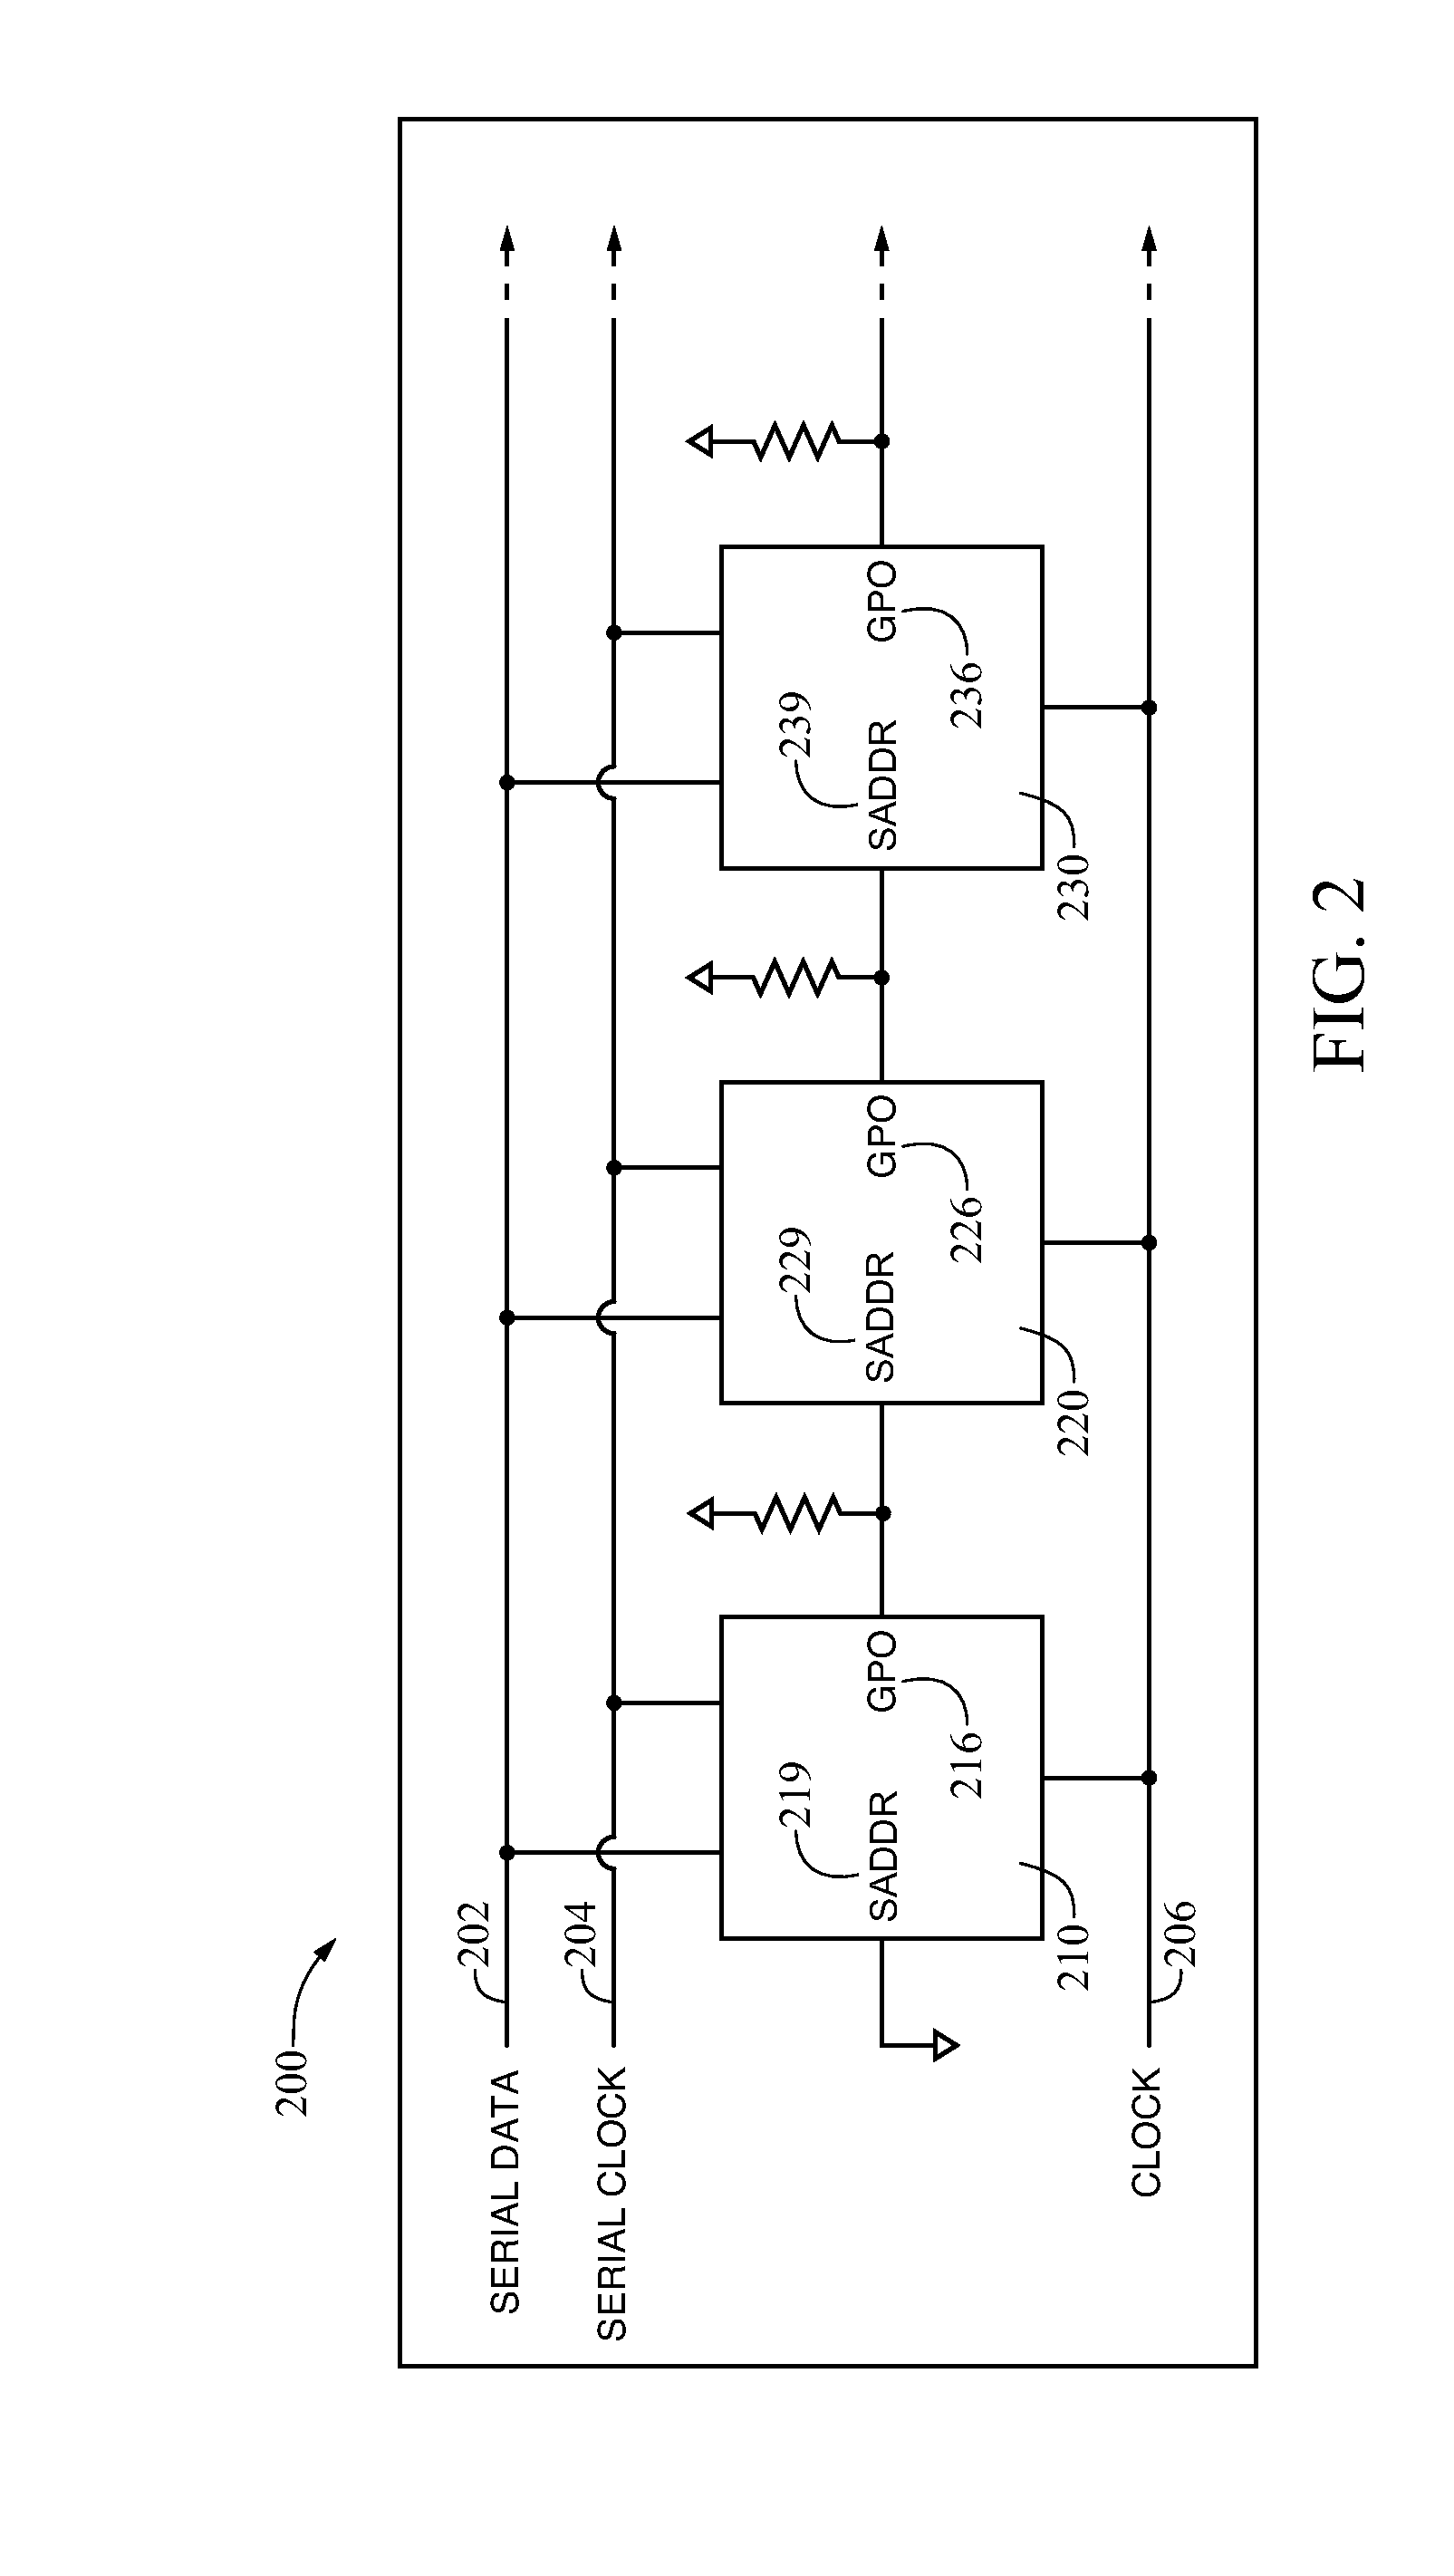 Systems and methods for addressing and synchronizing multiple devices